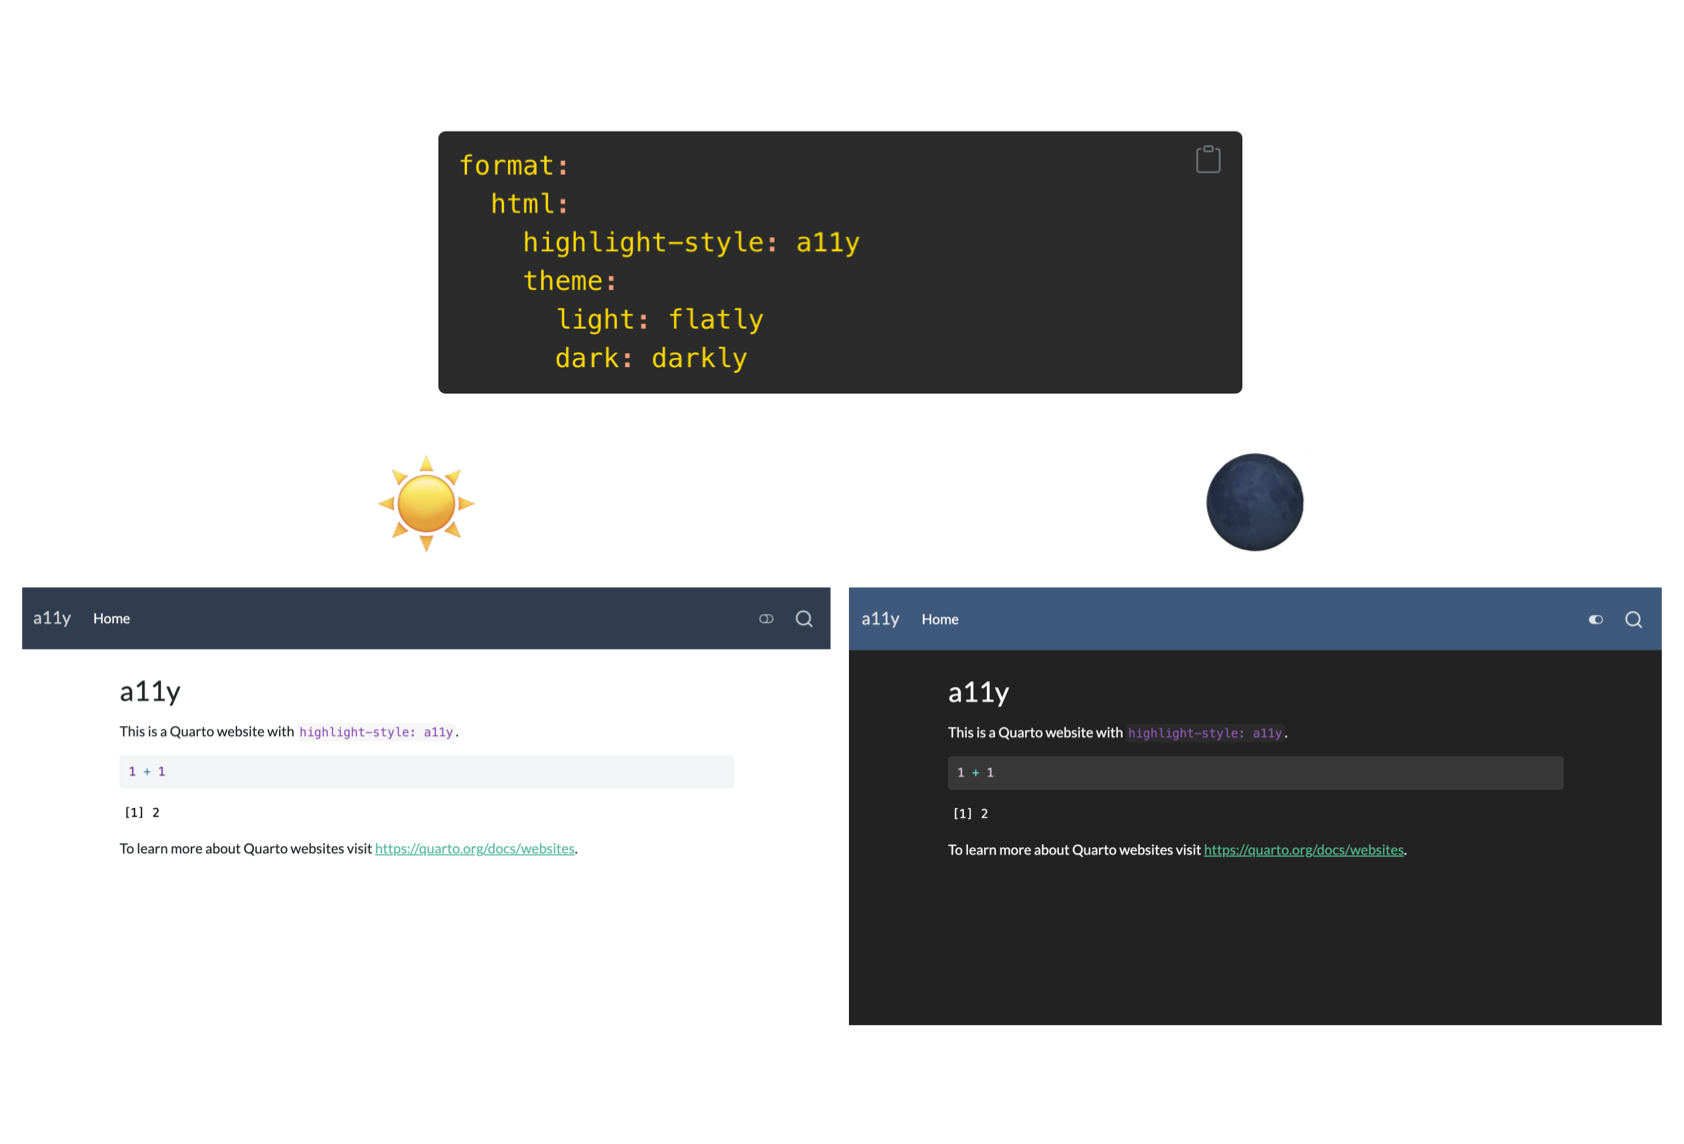 YAML for setting highlight-style to a11y as well as for light and dark theme (also provided in the blog post) and the resulting webpage in light and dark mode showing how the a11y theme adapts.